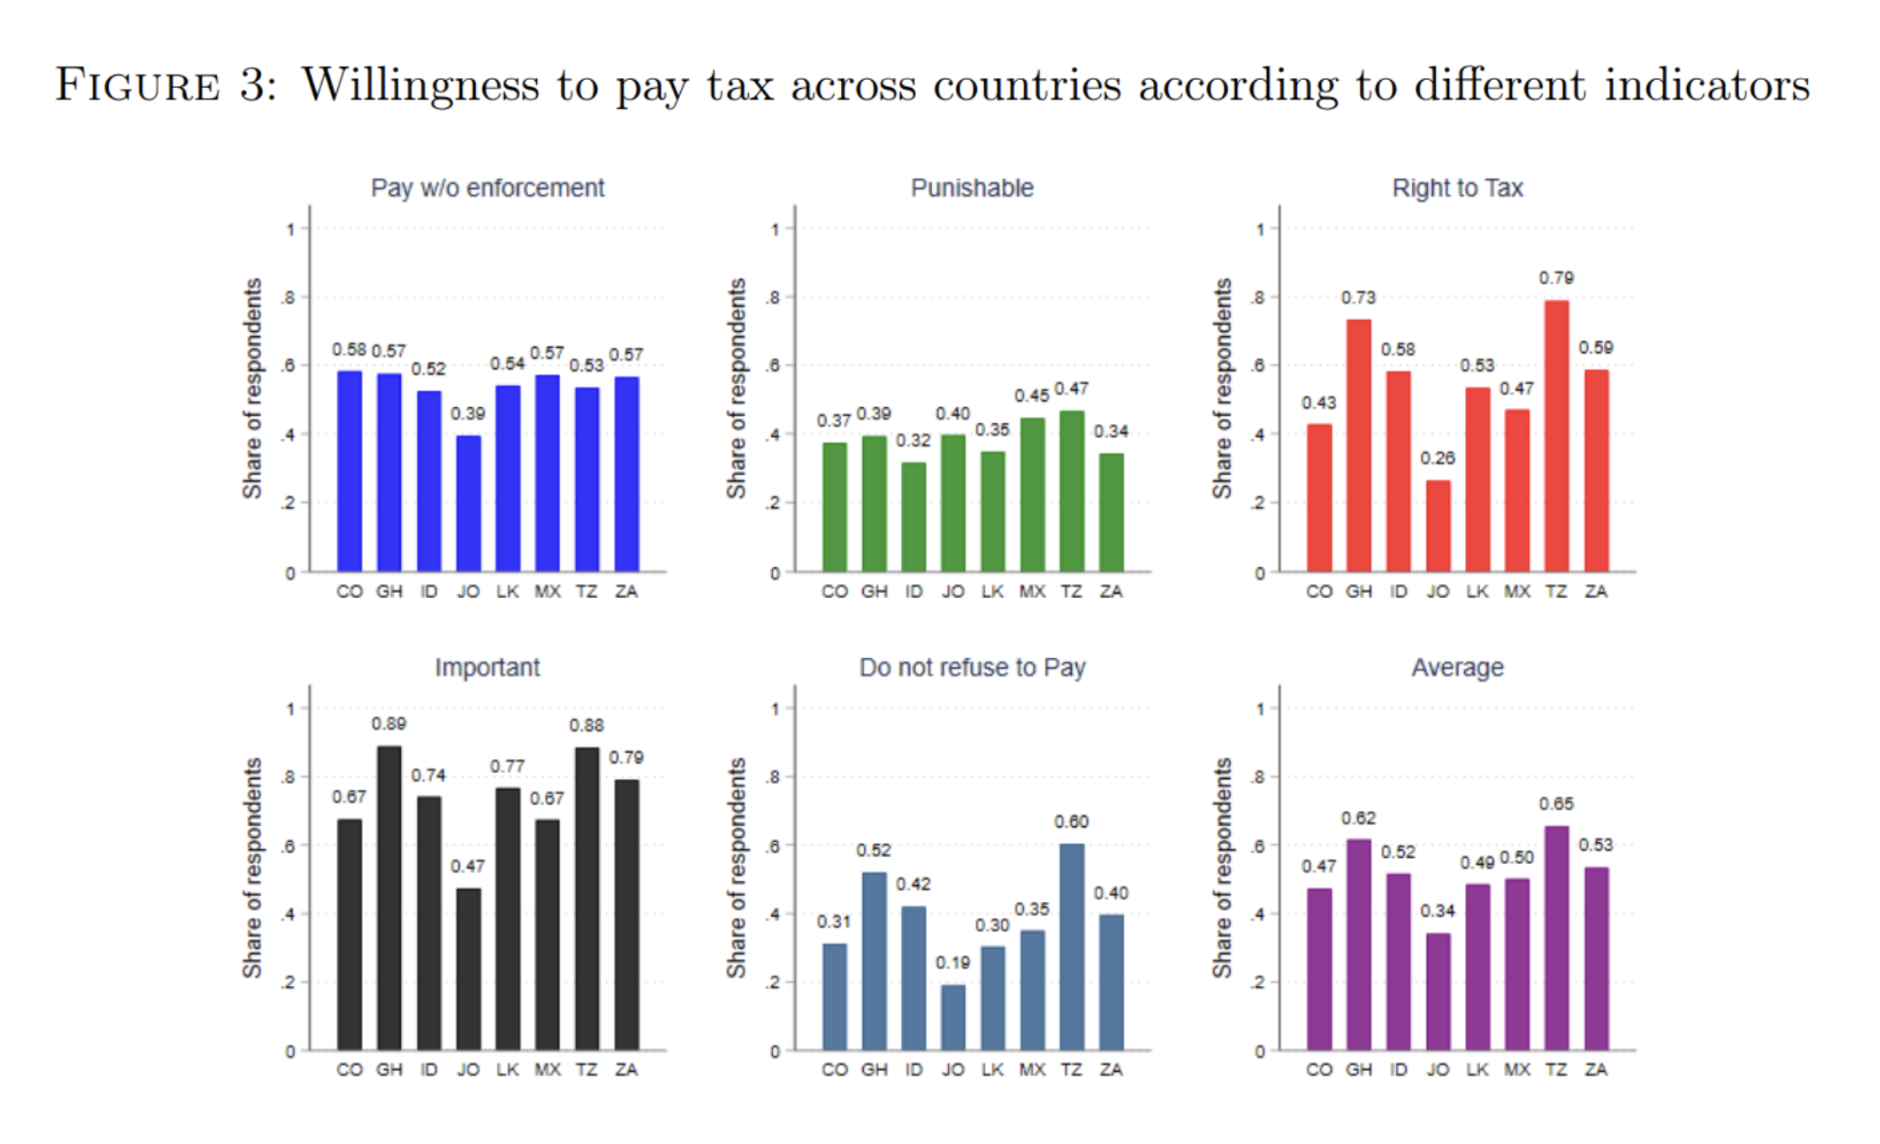 Charts depicting willingness to pay income tax across countries